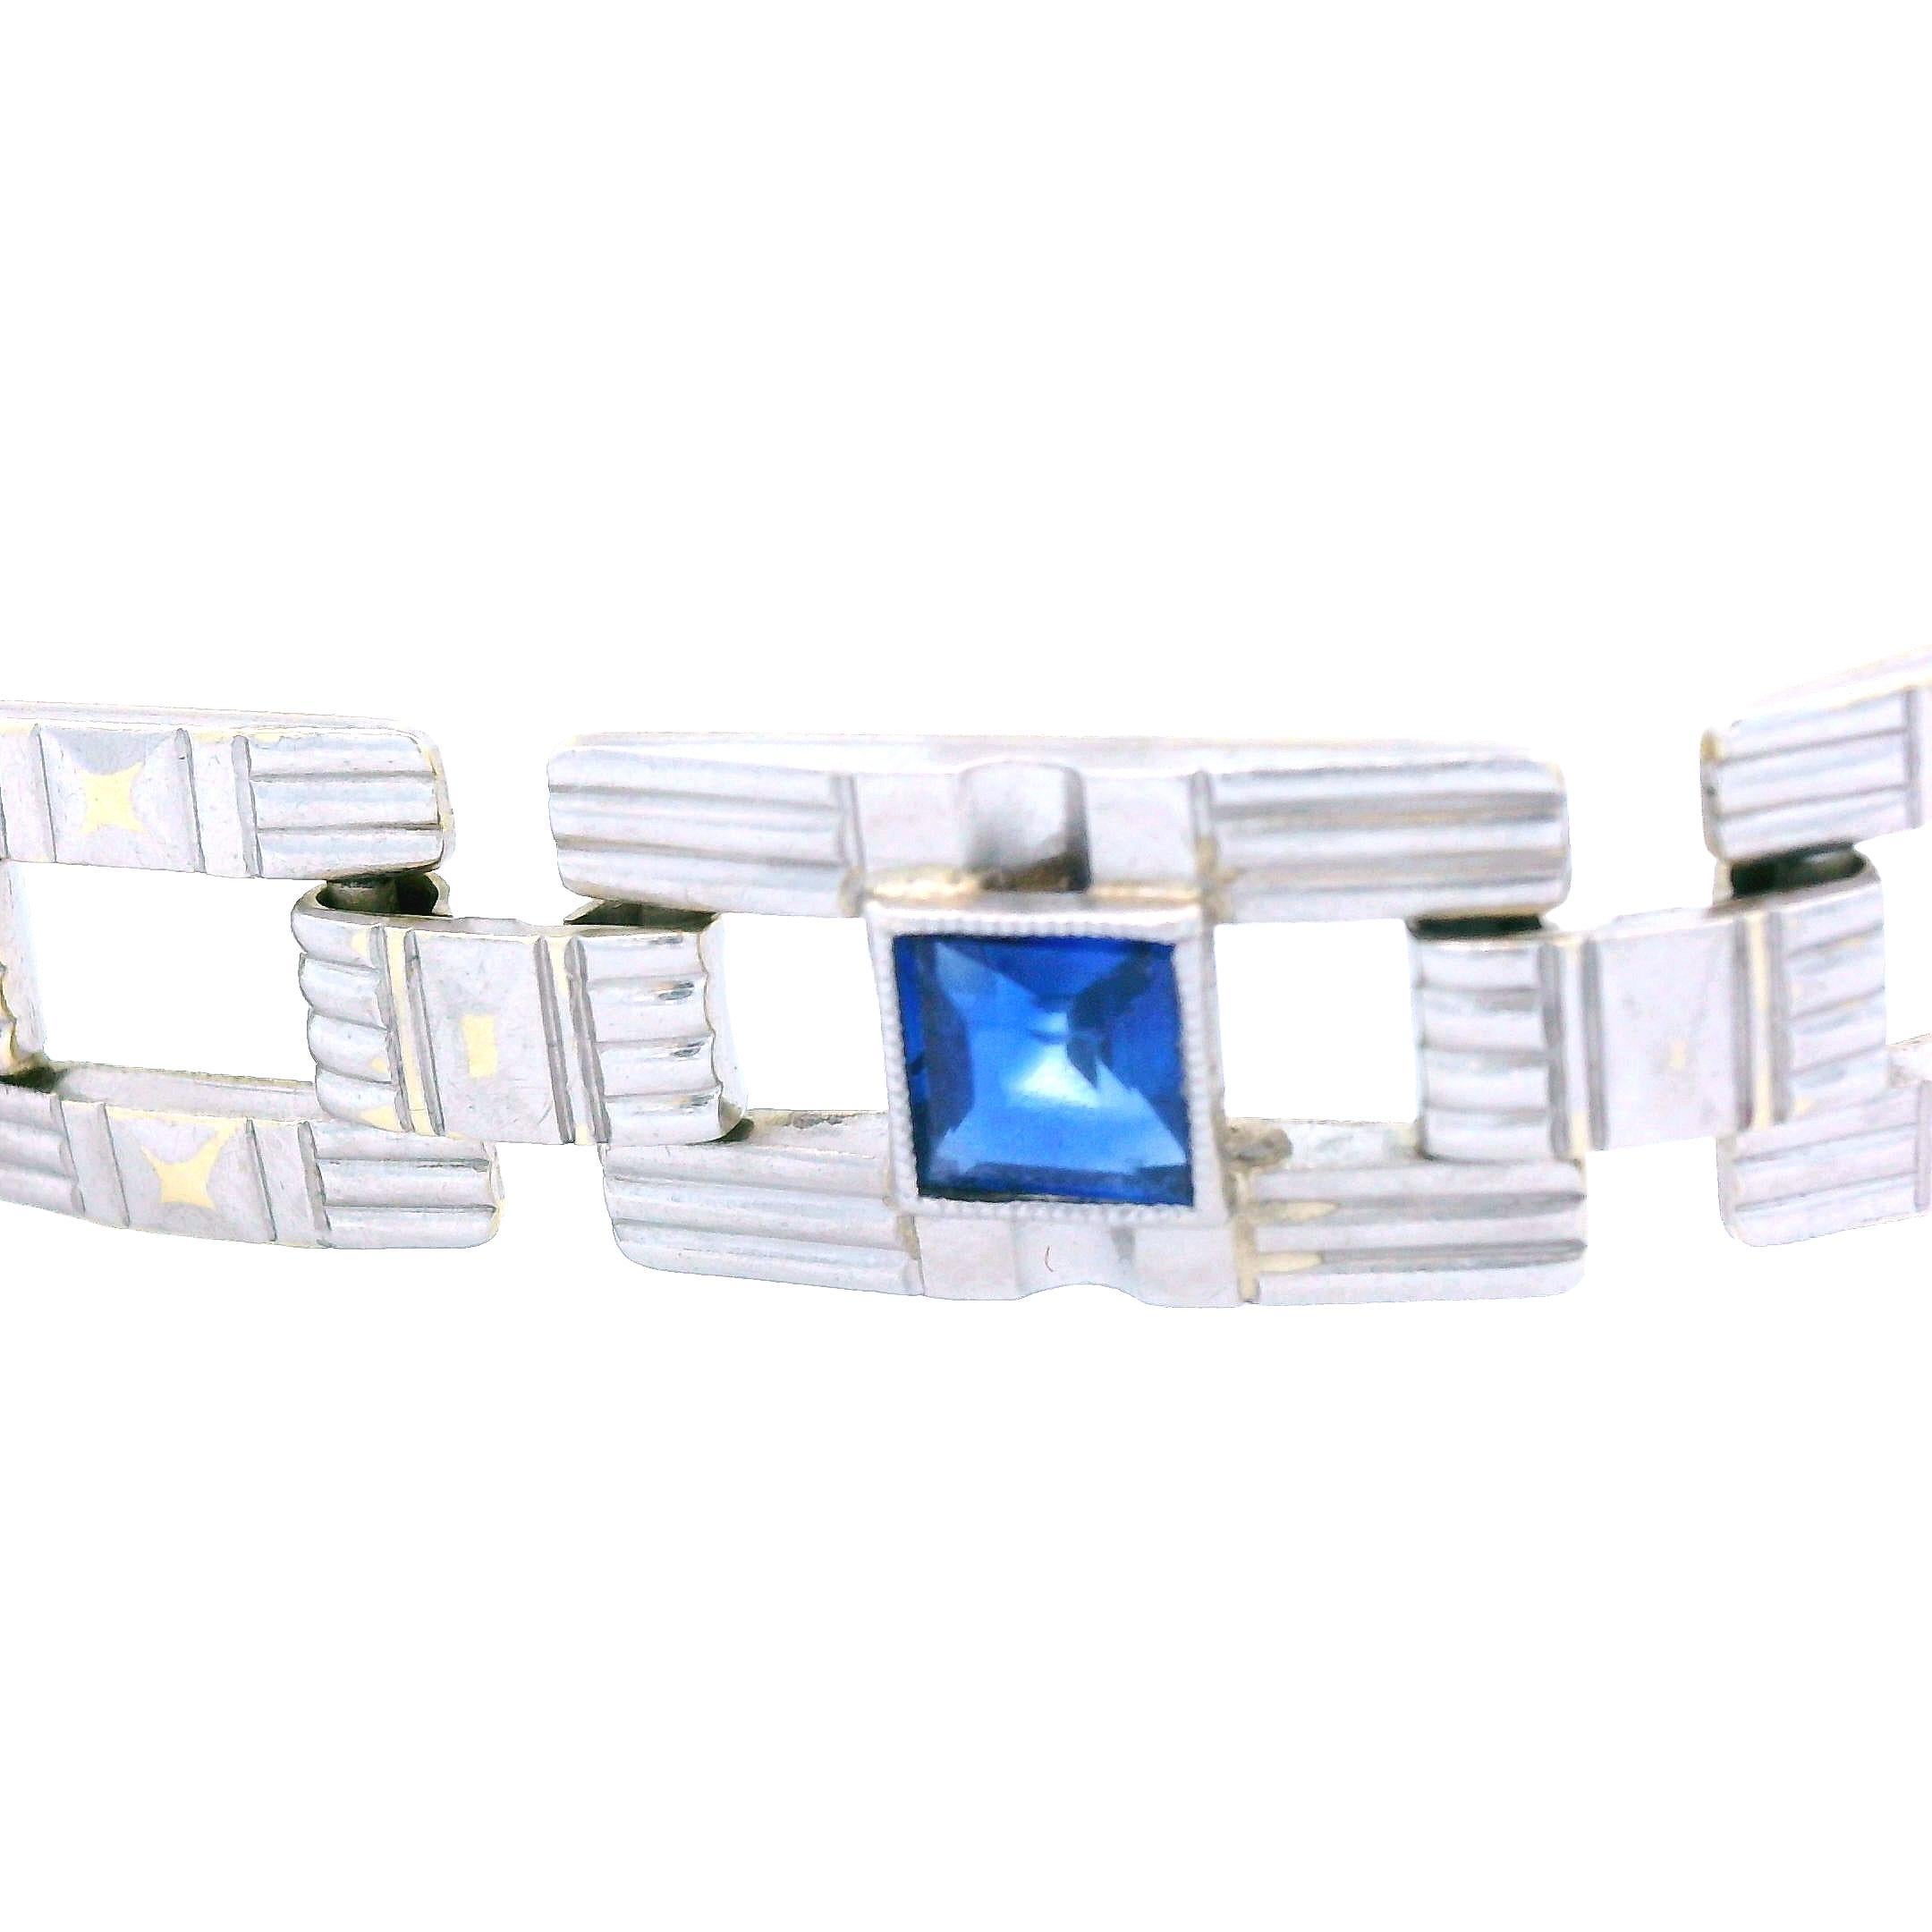 This Art Deco bracelet comes from 1915 and is made in 14k yellow gold and platinum. The entire bracelet is made in 14k yellow gold, which can be seen on the inside of the bracelet, while the outside is platinum over the 14k yellow gold. The two tone